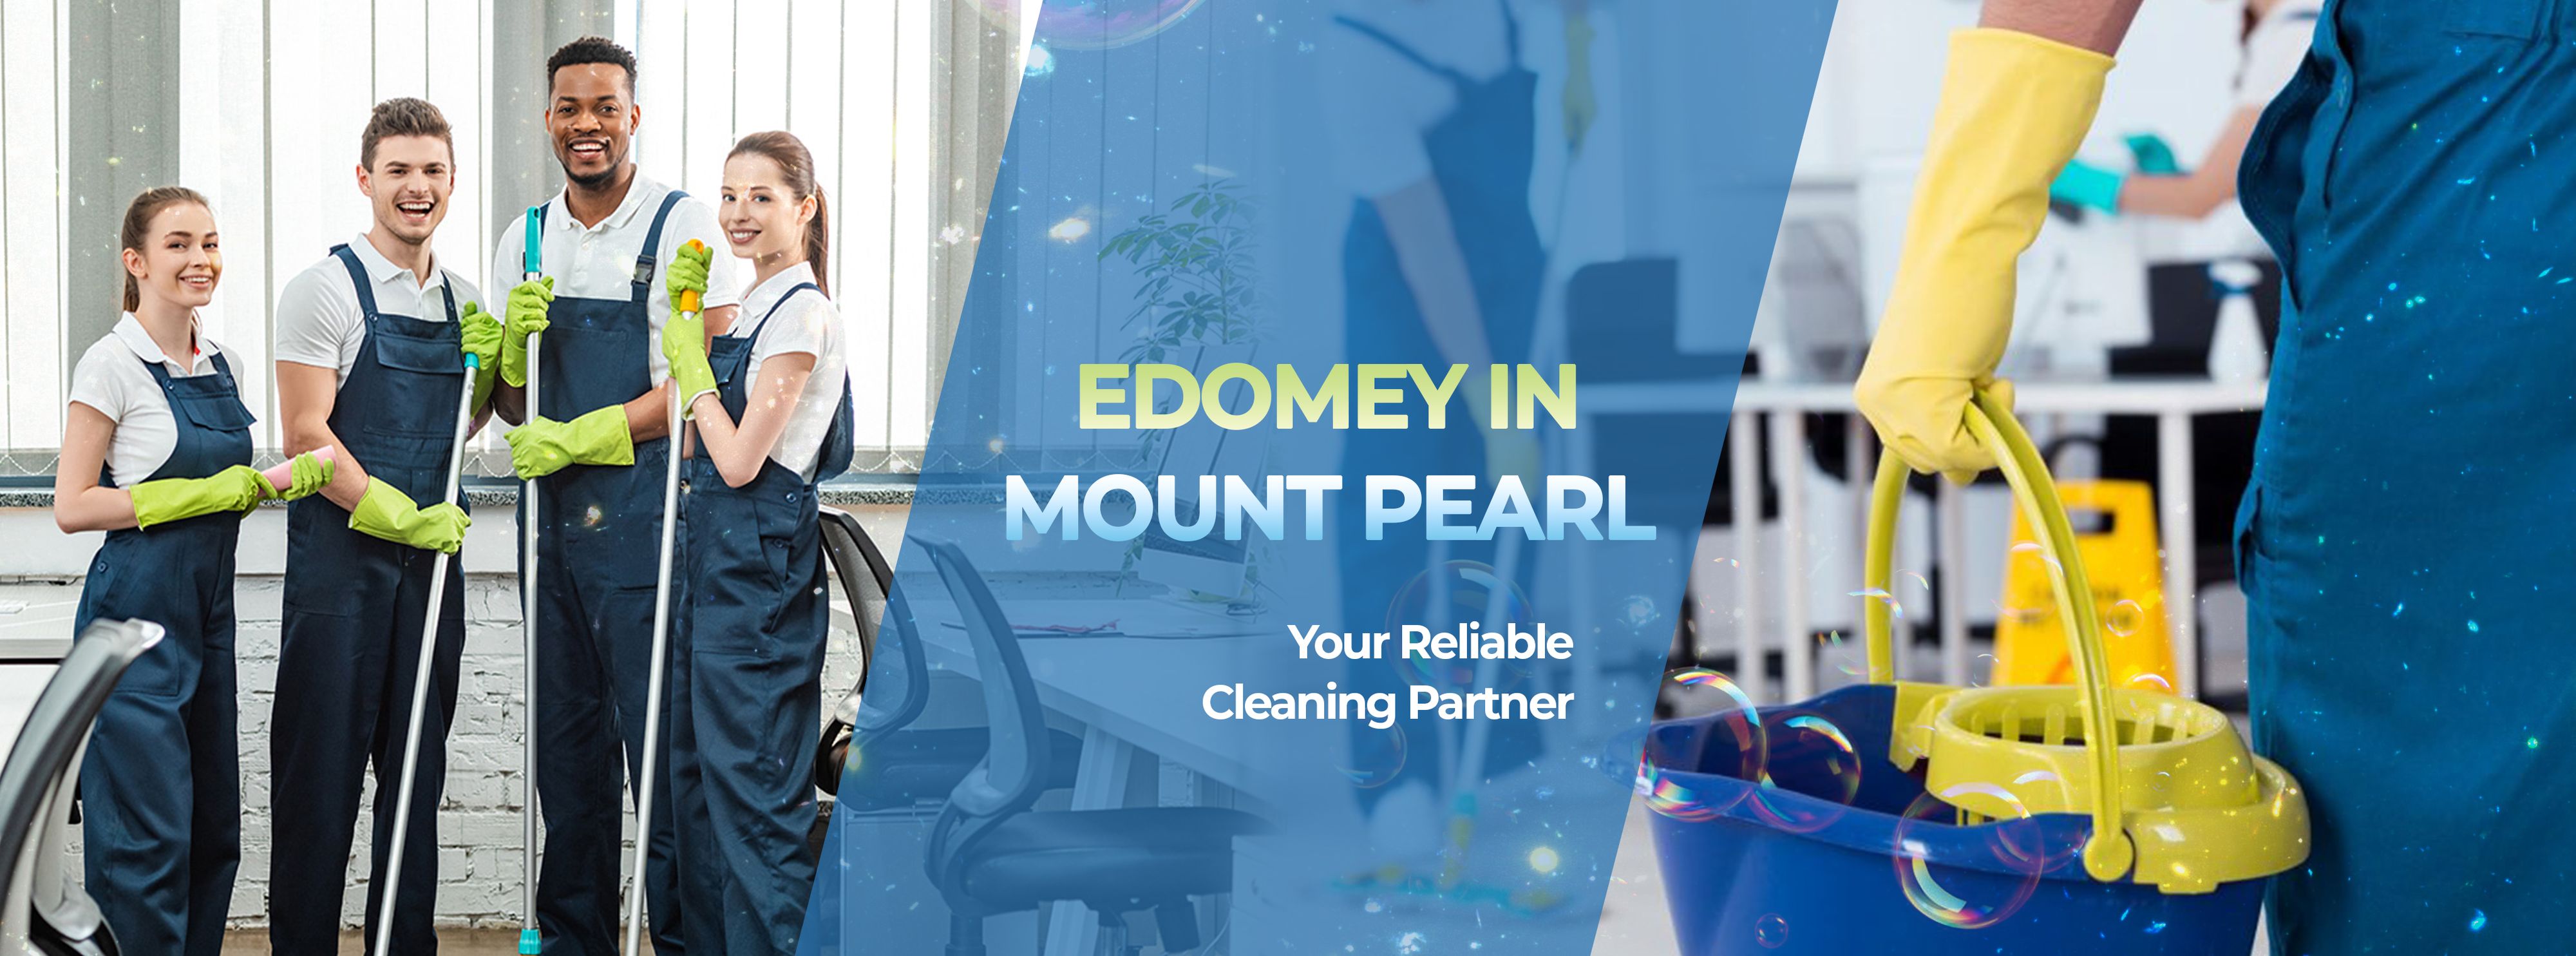 affordable Commercial Cleaning Services in Mount Pearl